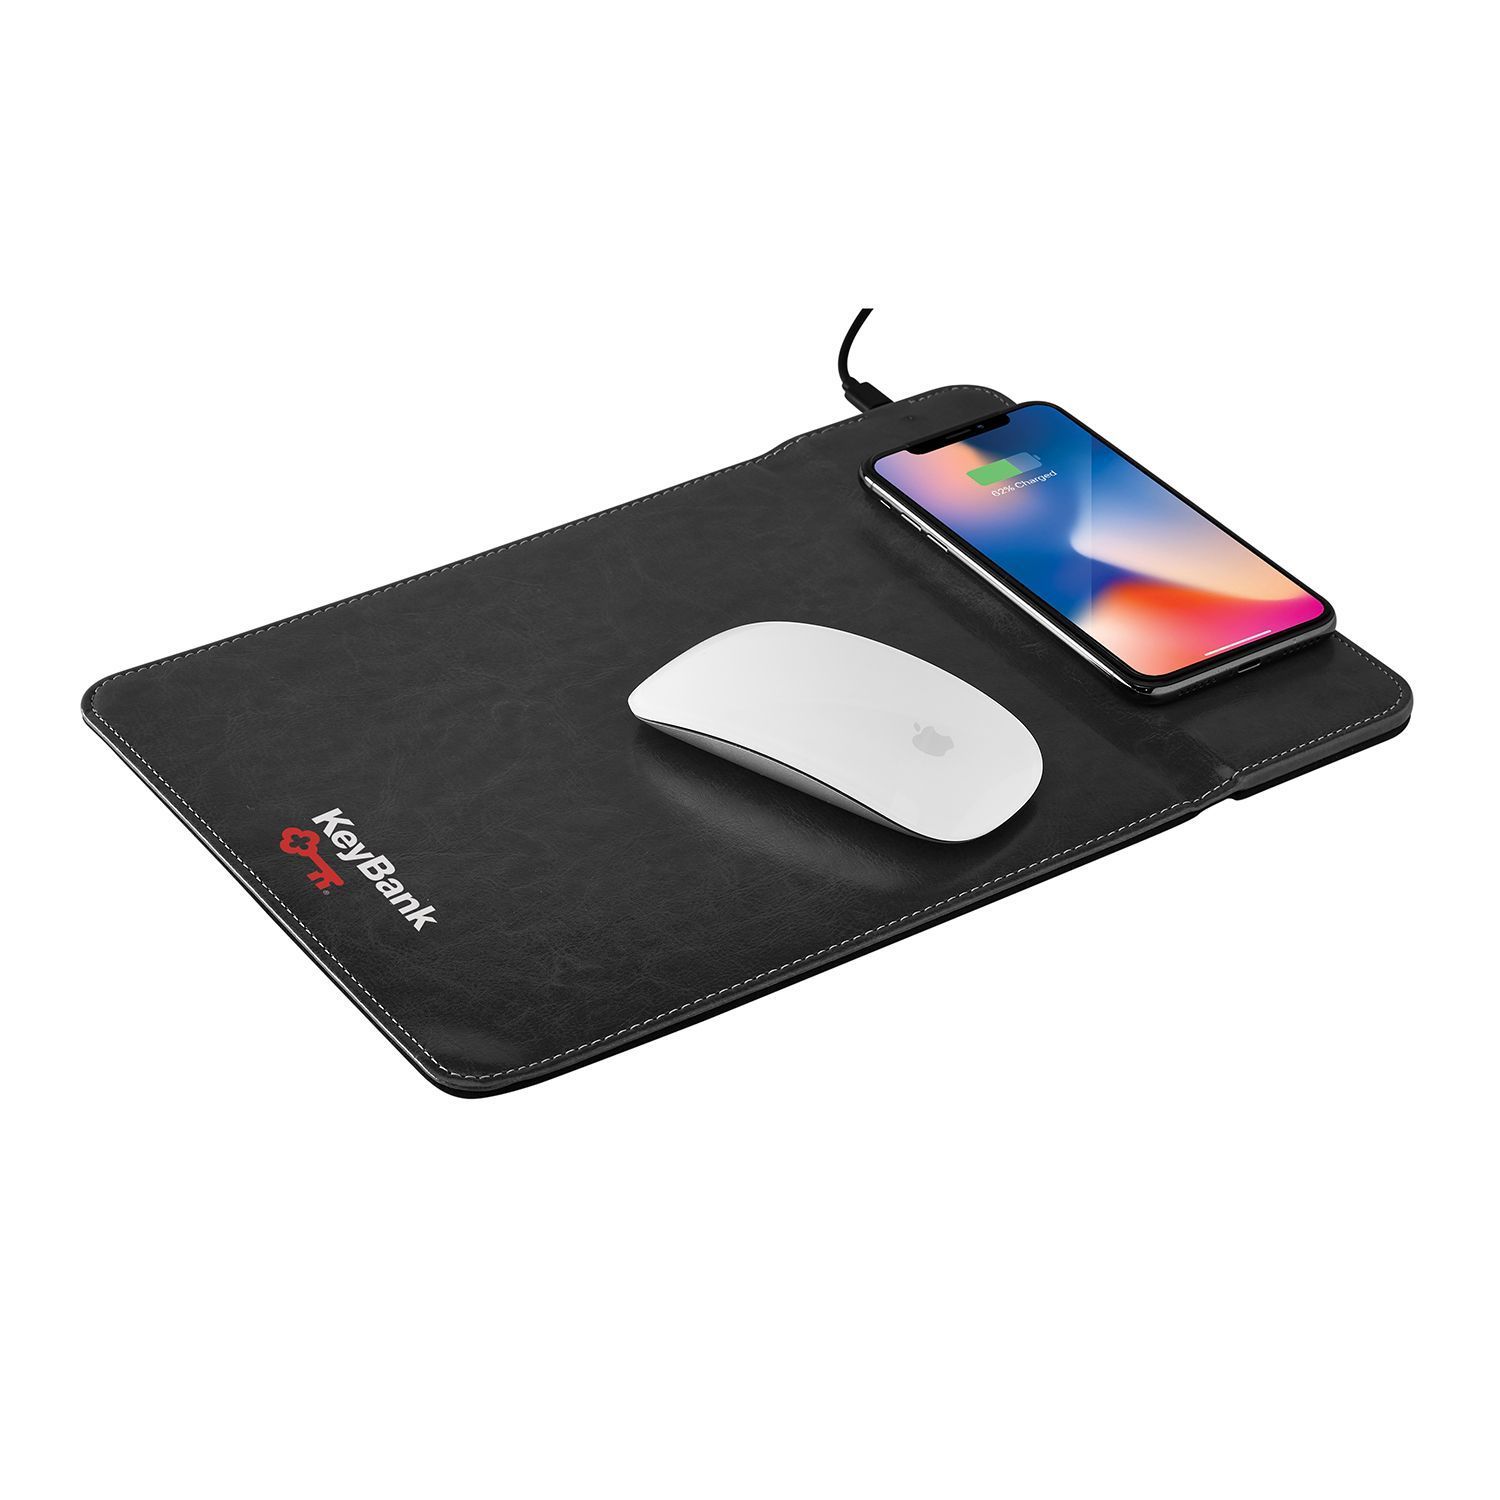 The Office Wireless Charging Mousepad with Phone Stand